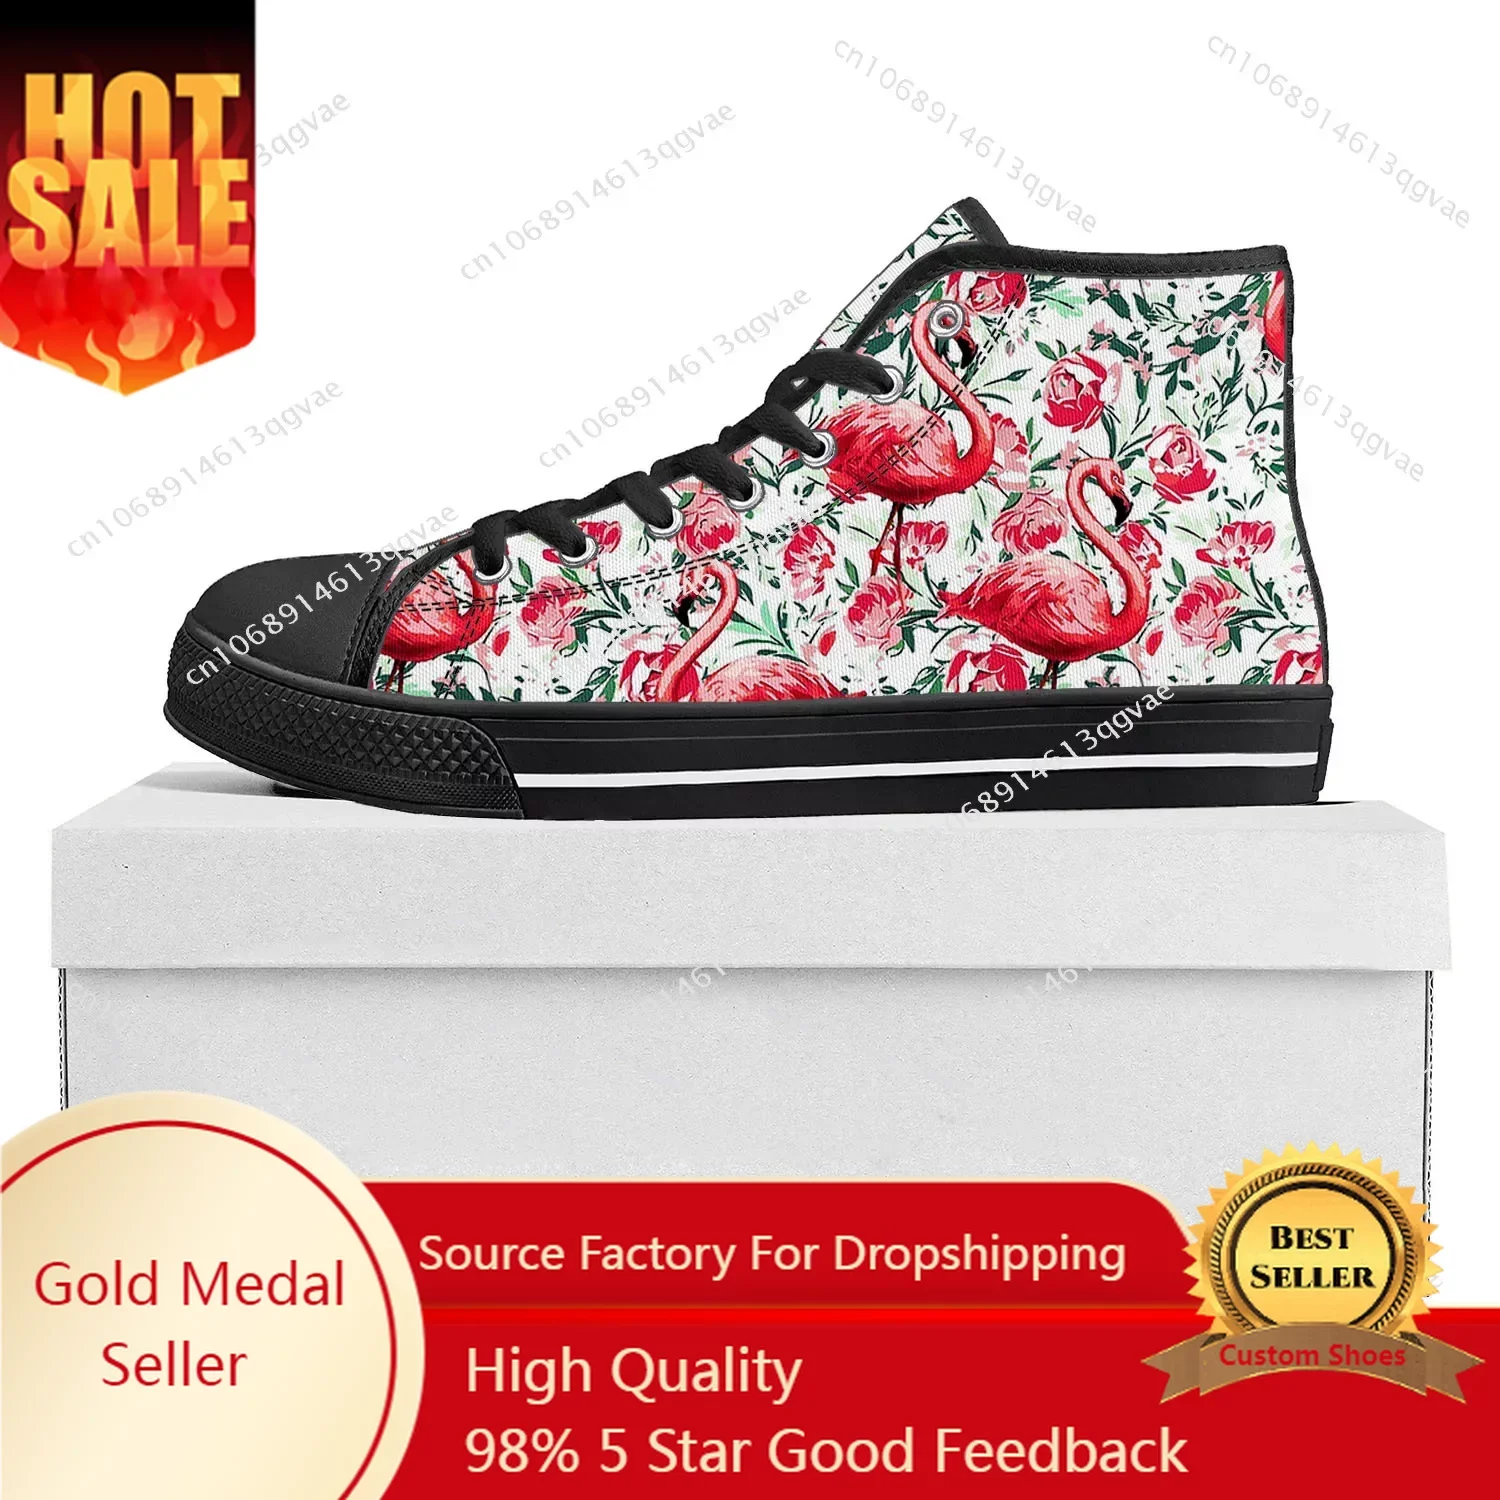 

Flamingo Printed High Top High Quality Sneakers Mens Womens Teenager Canvas Sneaker Casual Couple Shoes Custom Made Shoe Black